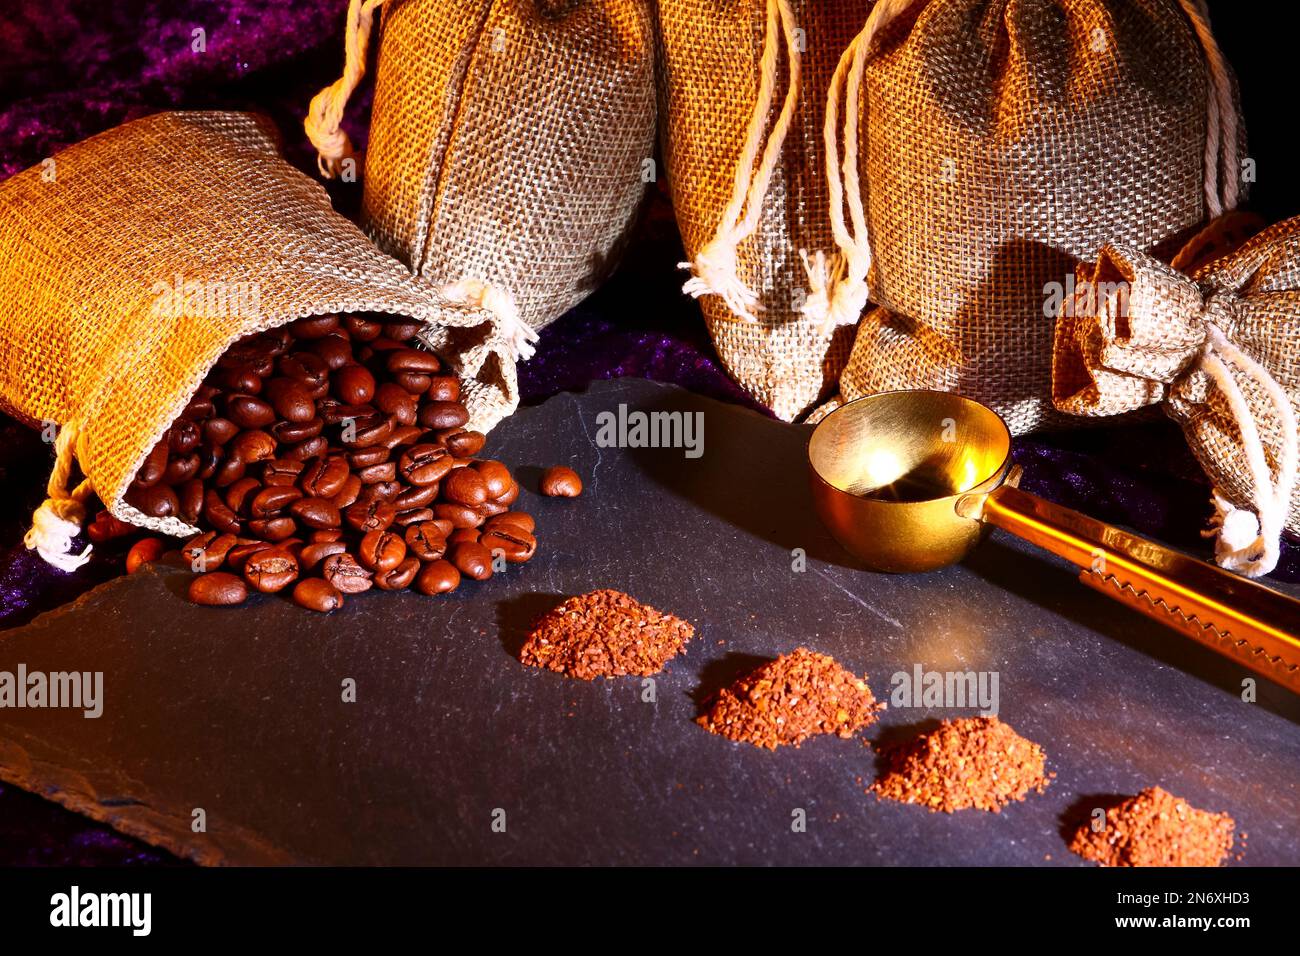 Hessian sacks full of roasted coffee beans with piles of freshly ground coffee Stock Photo